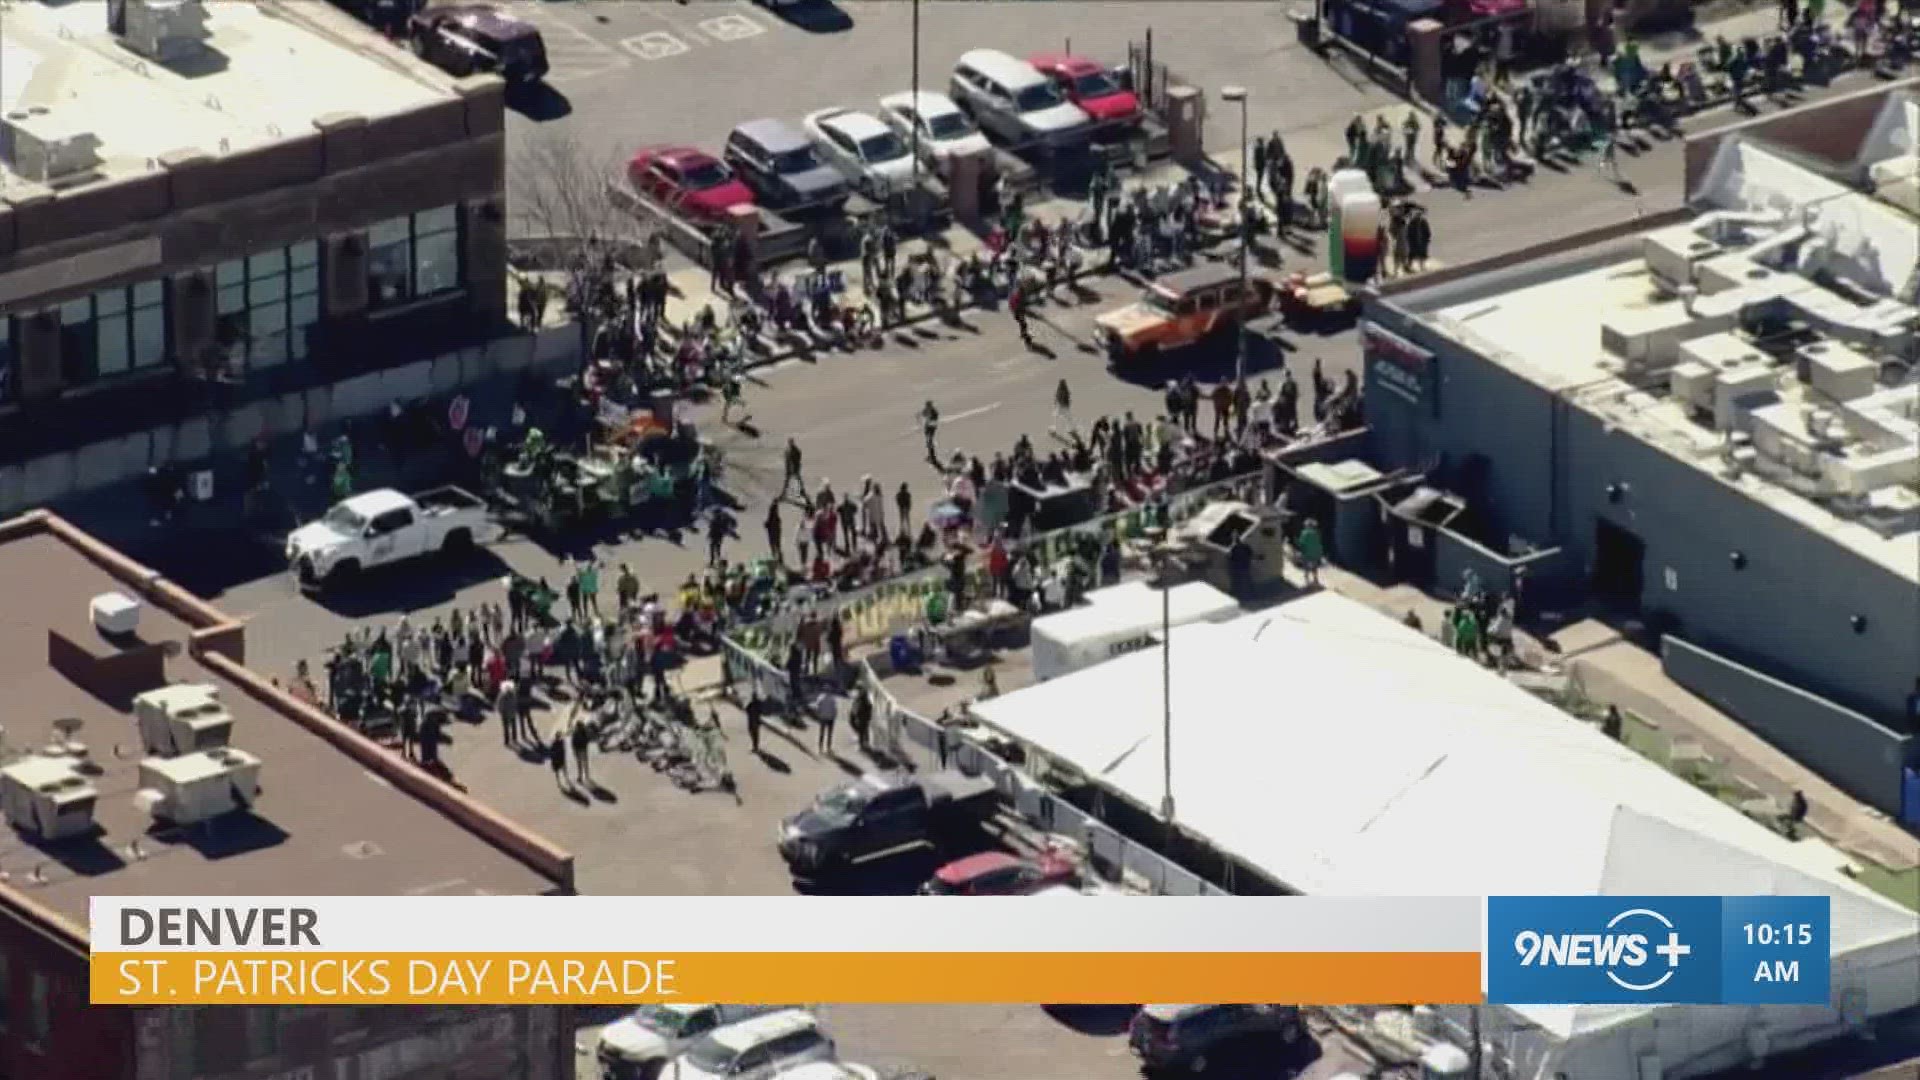 Take a live aerial look over the St. Patrick's Day parade in Denver.